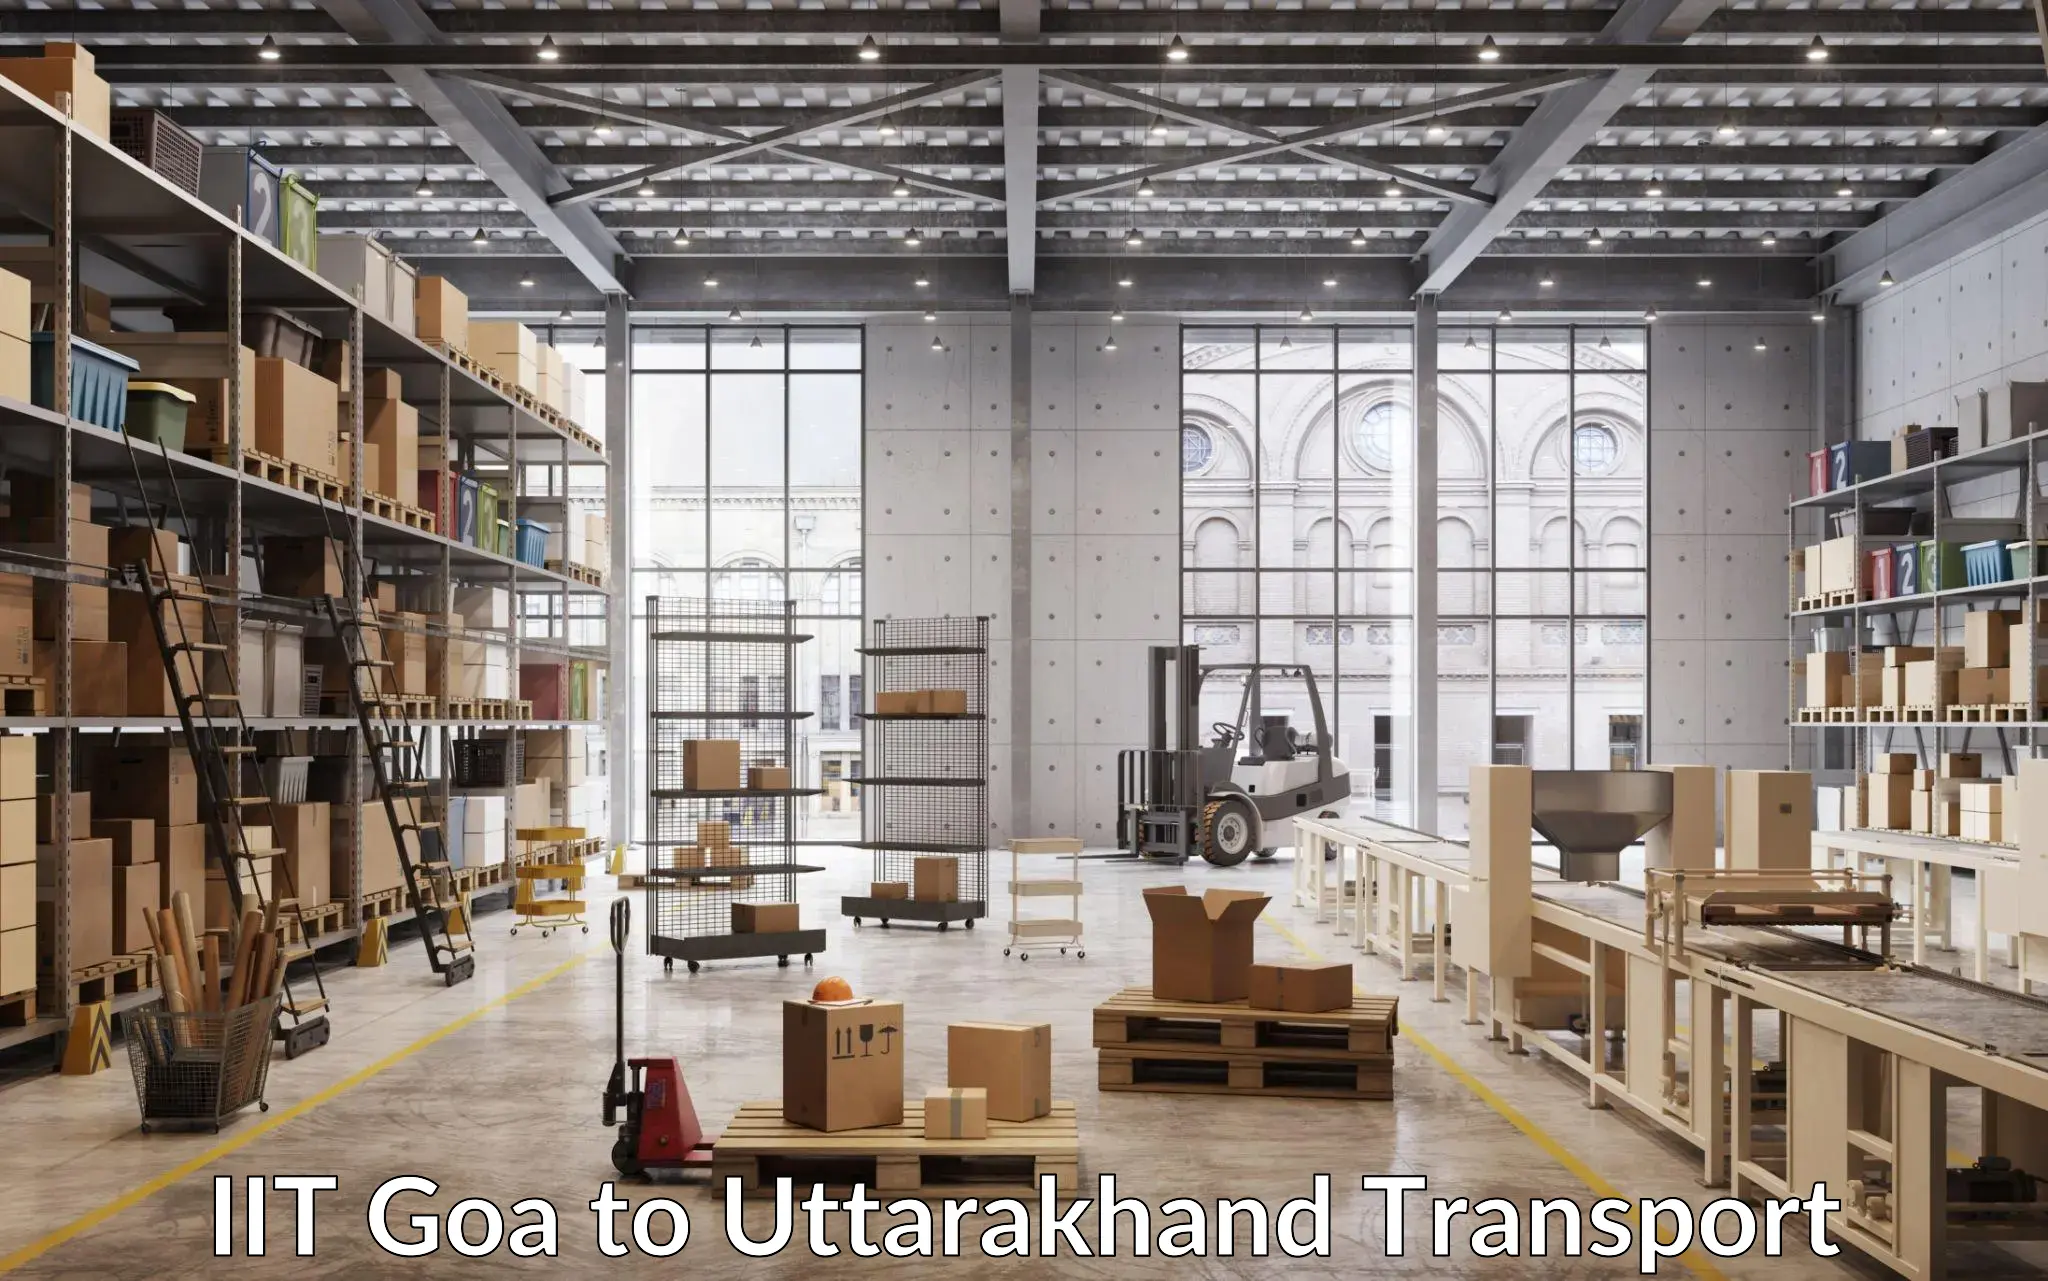 Transport bike from one state to another IIT Goa to Kotdwara